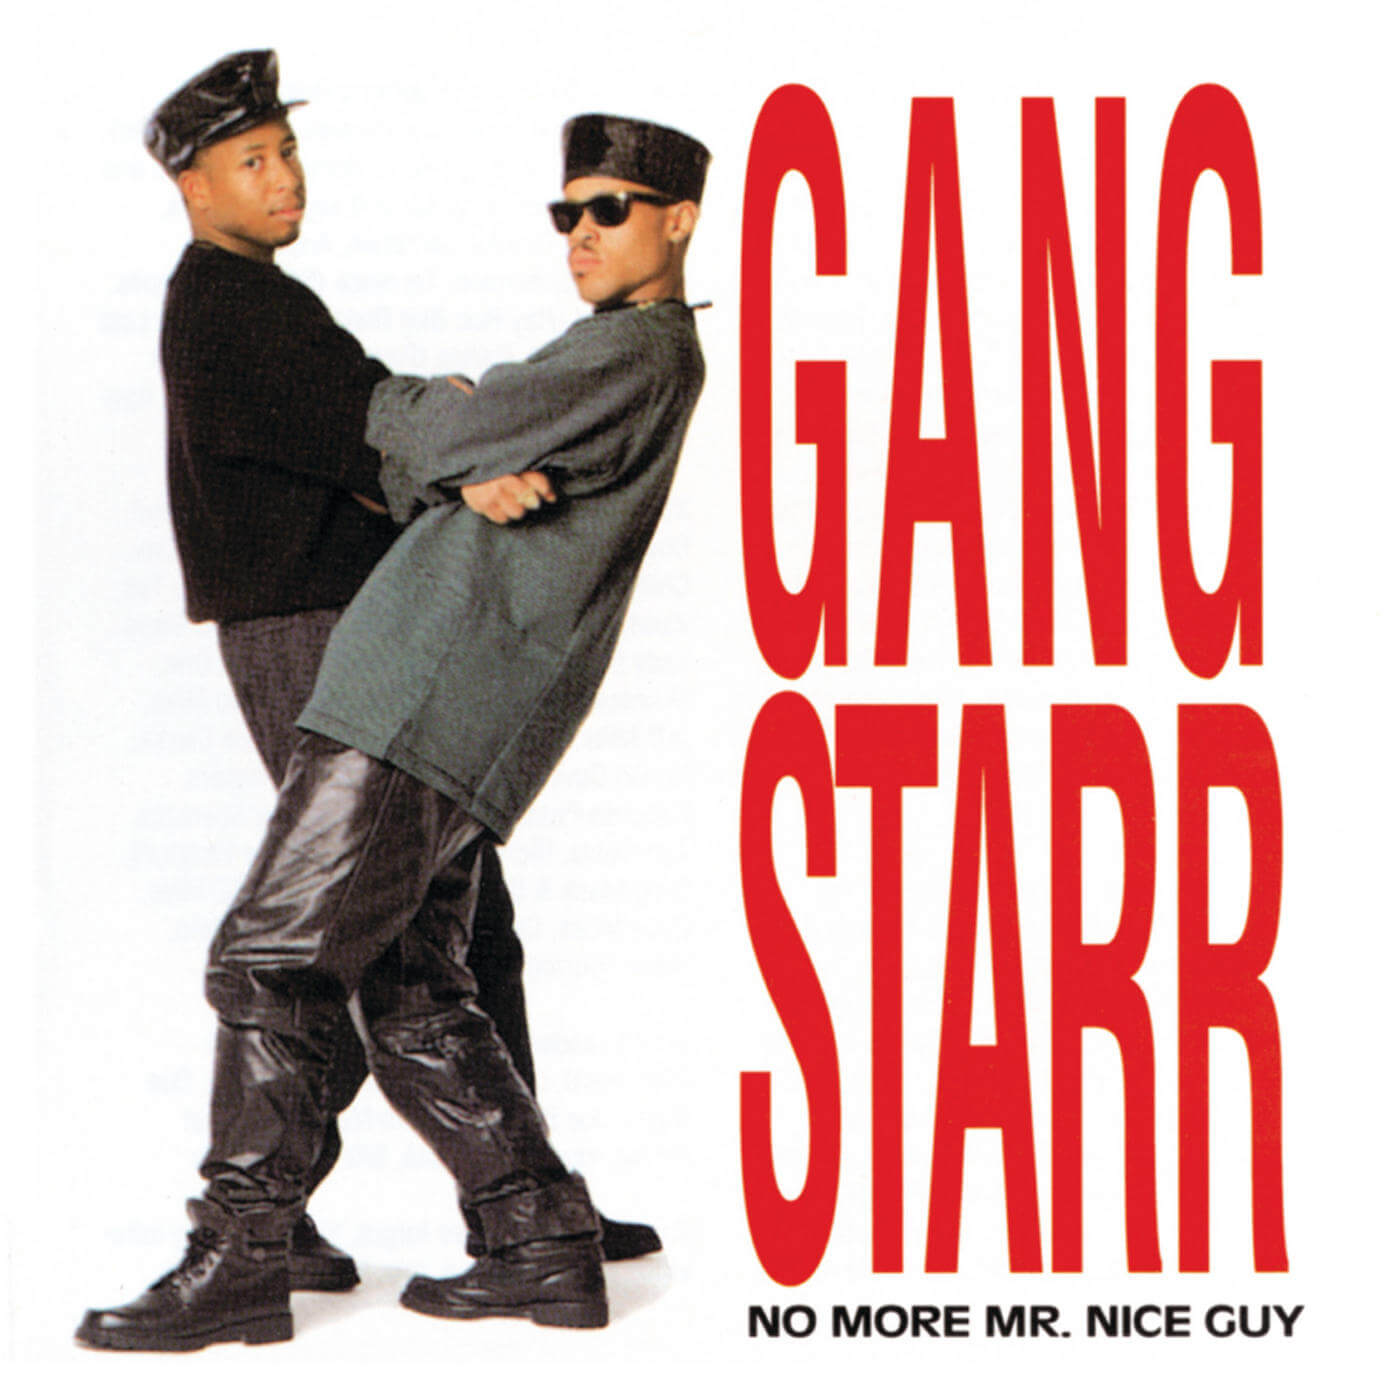 gang starr step in the arena download zip